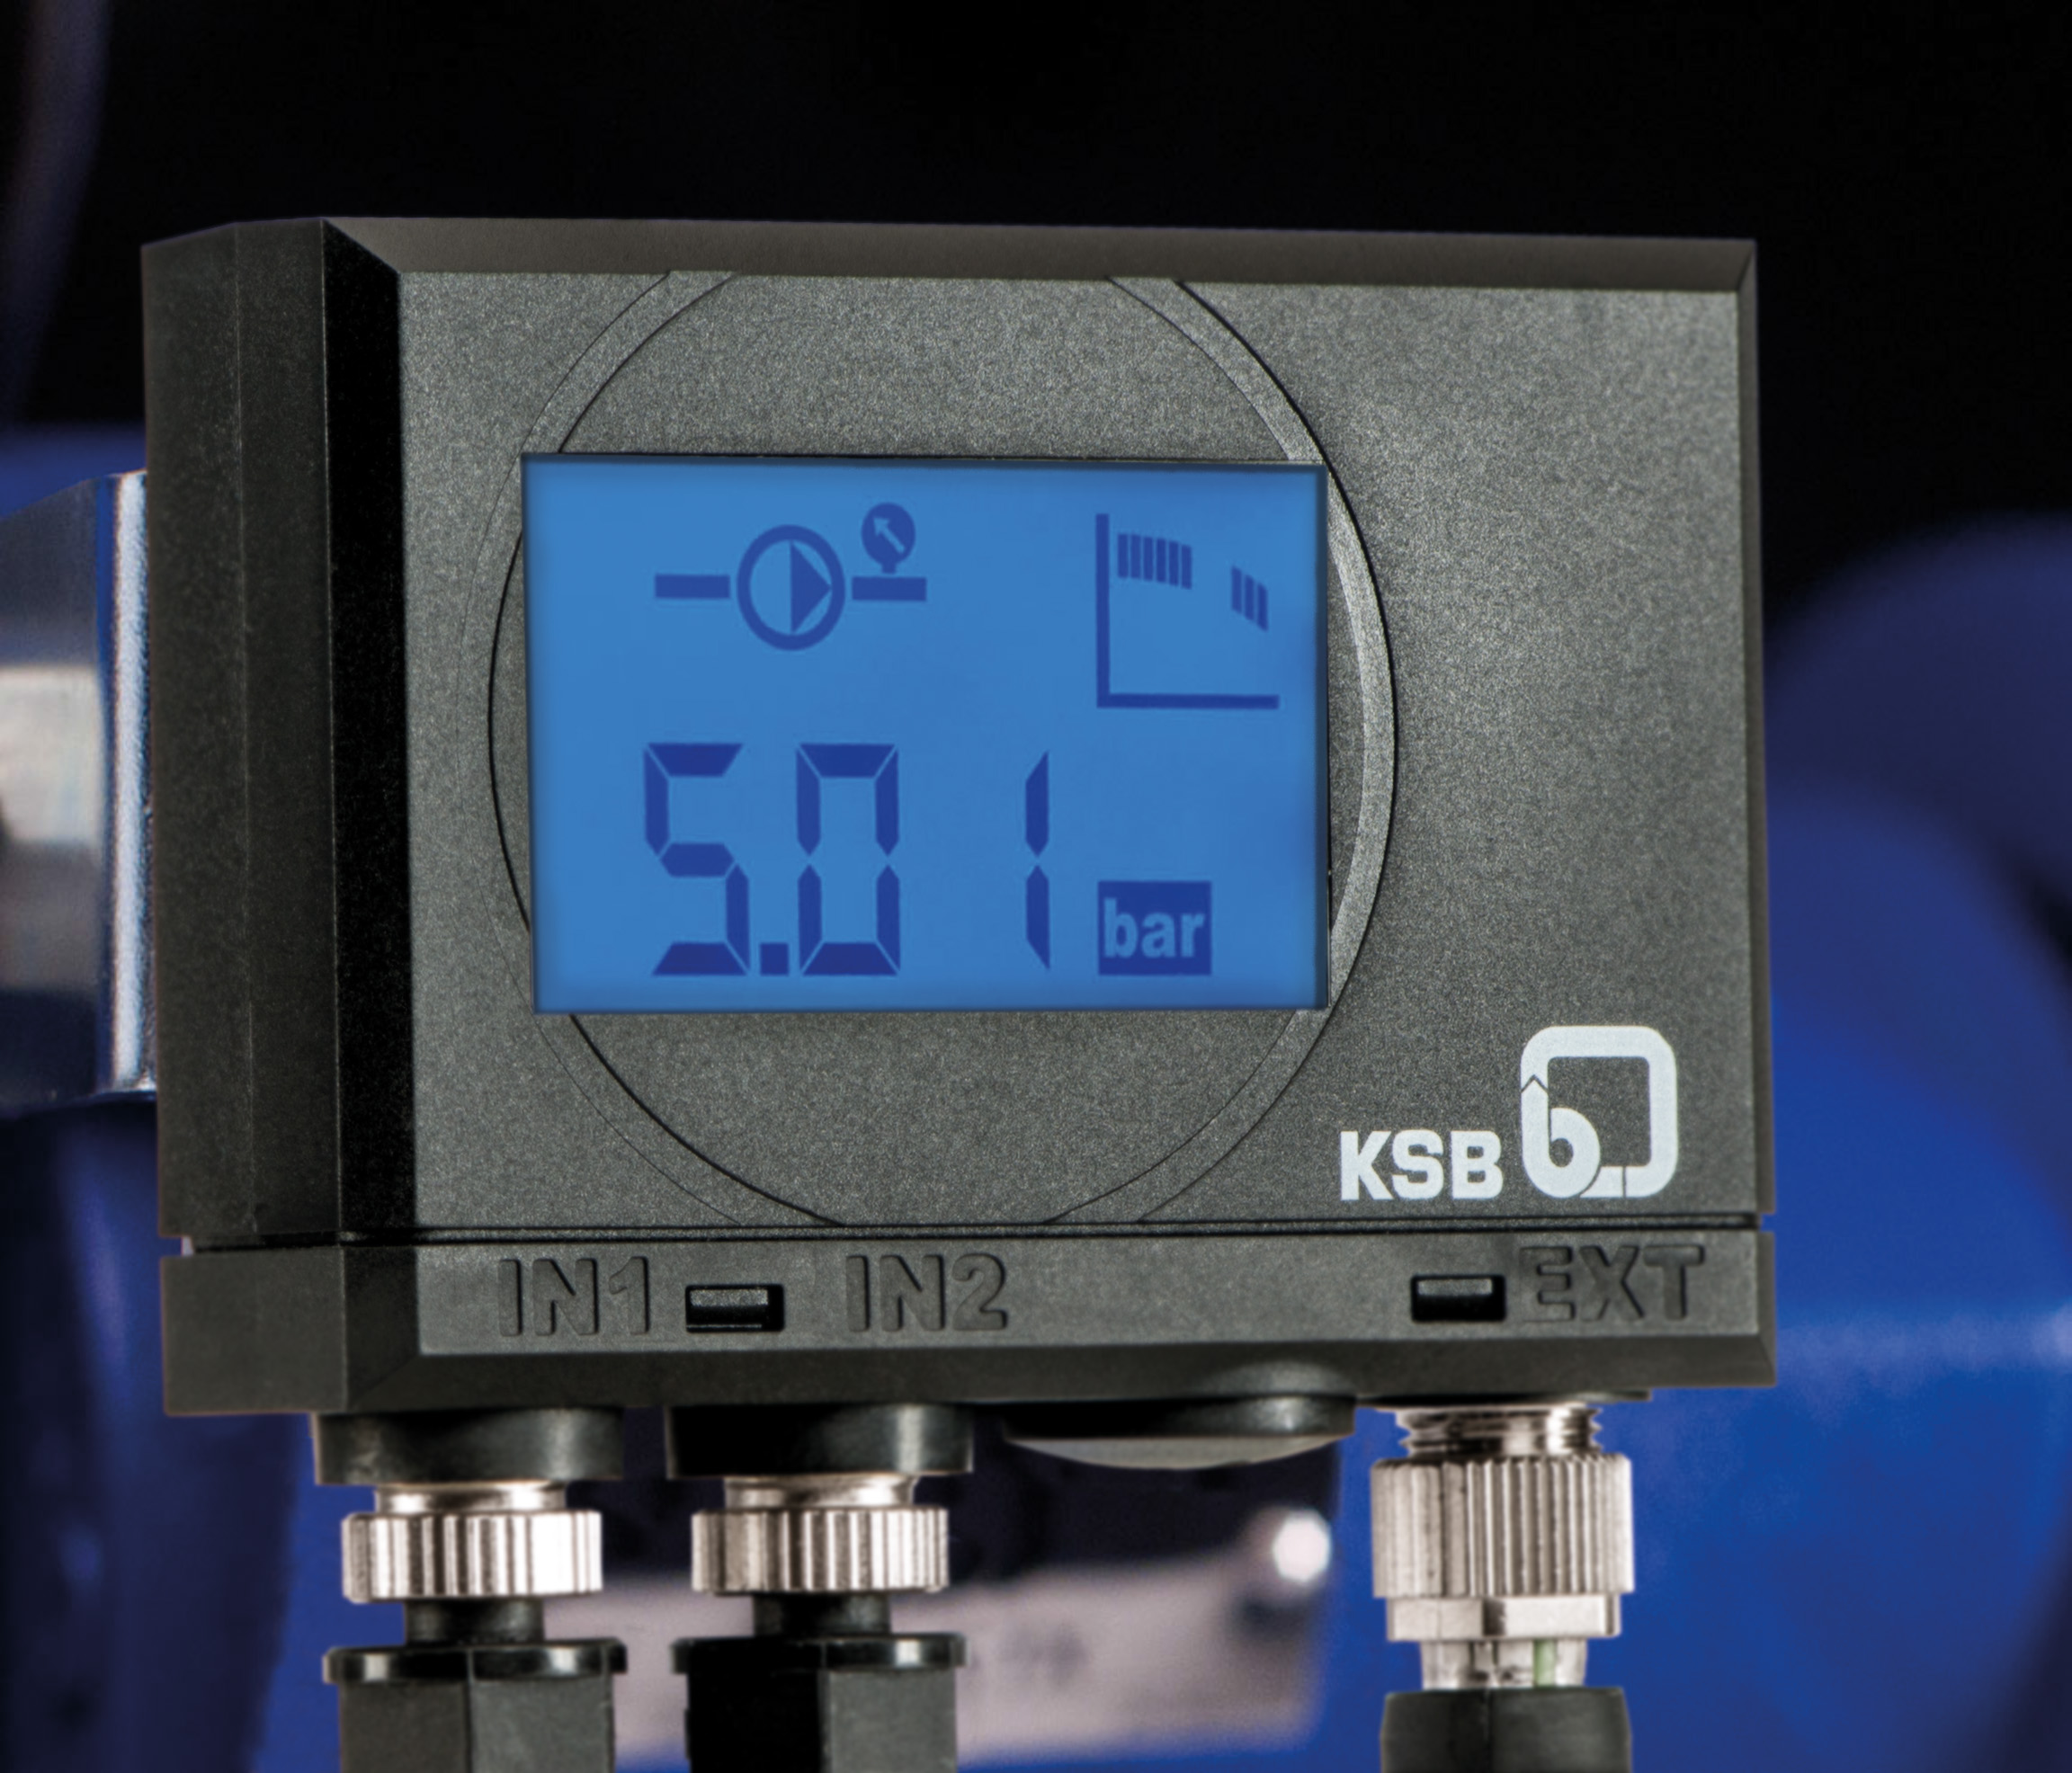 PumpMeter continuously analyses the pump operating data, establishes a load profile, and makes the operator aware of energy saving potential. ©KSB Aktiengesellschaft, Frankenthal